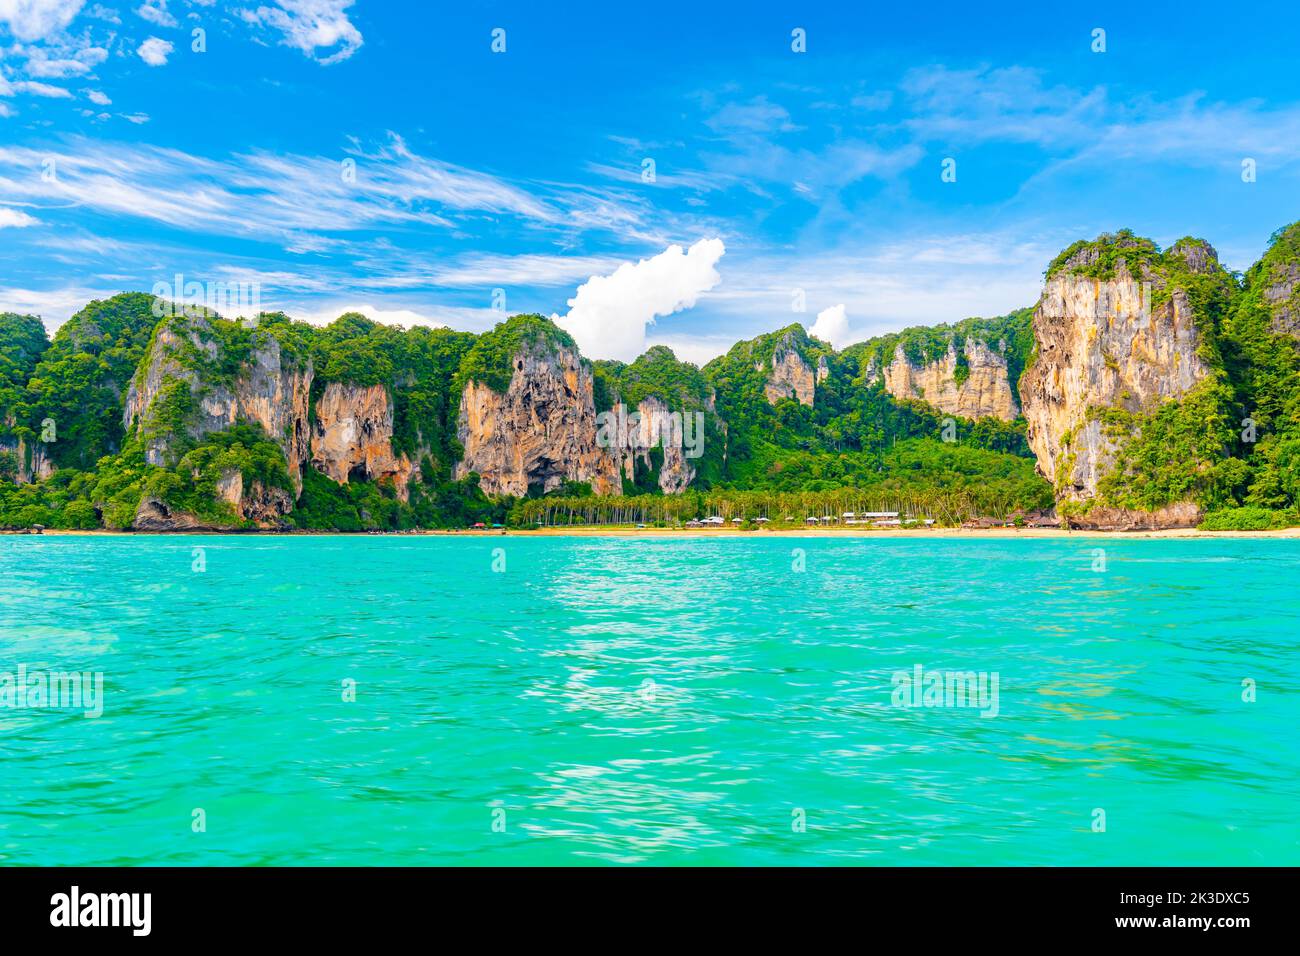 Panoramic view of Railay beach at Krabi town, Thailand. View from sea side to big limestone rocks with green jungle. Pure and vibrant turquoise water Stock Photo